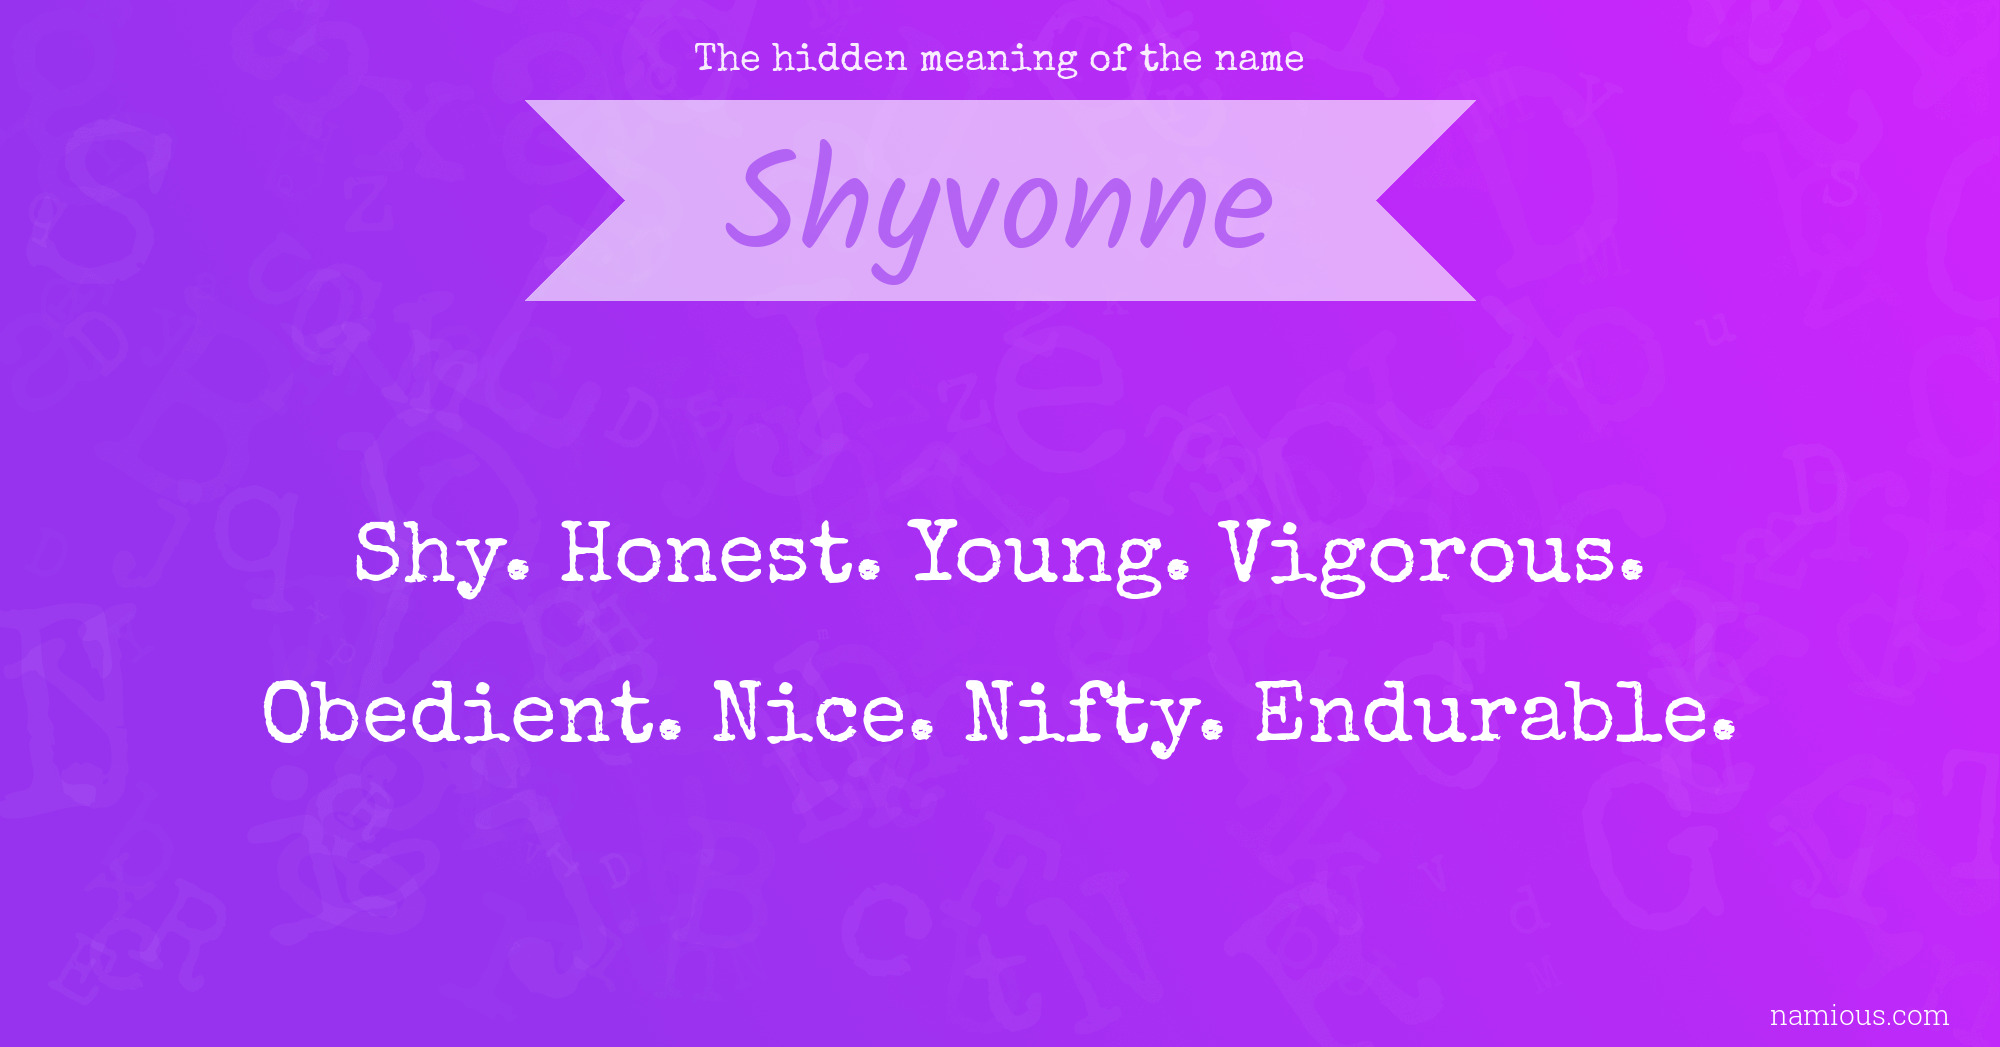 The hidden meaning of the name Shyvonne